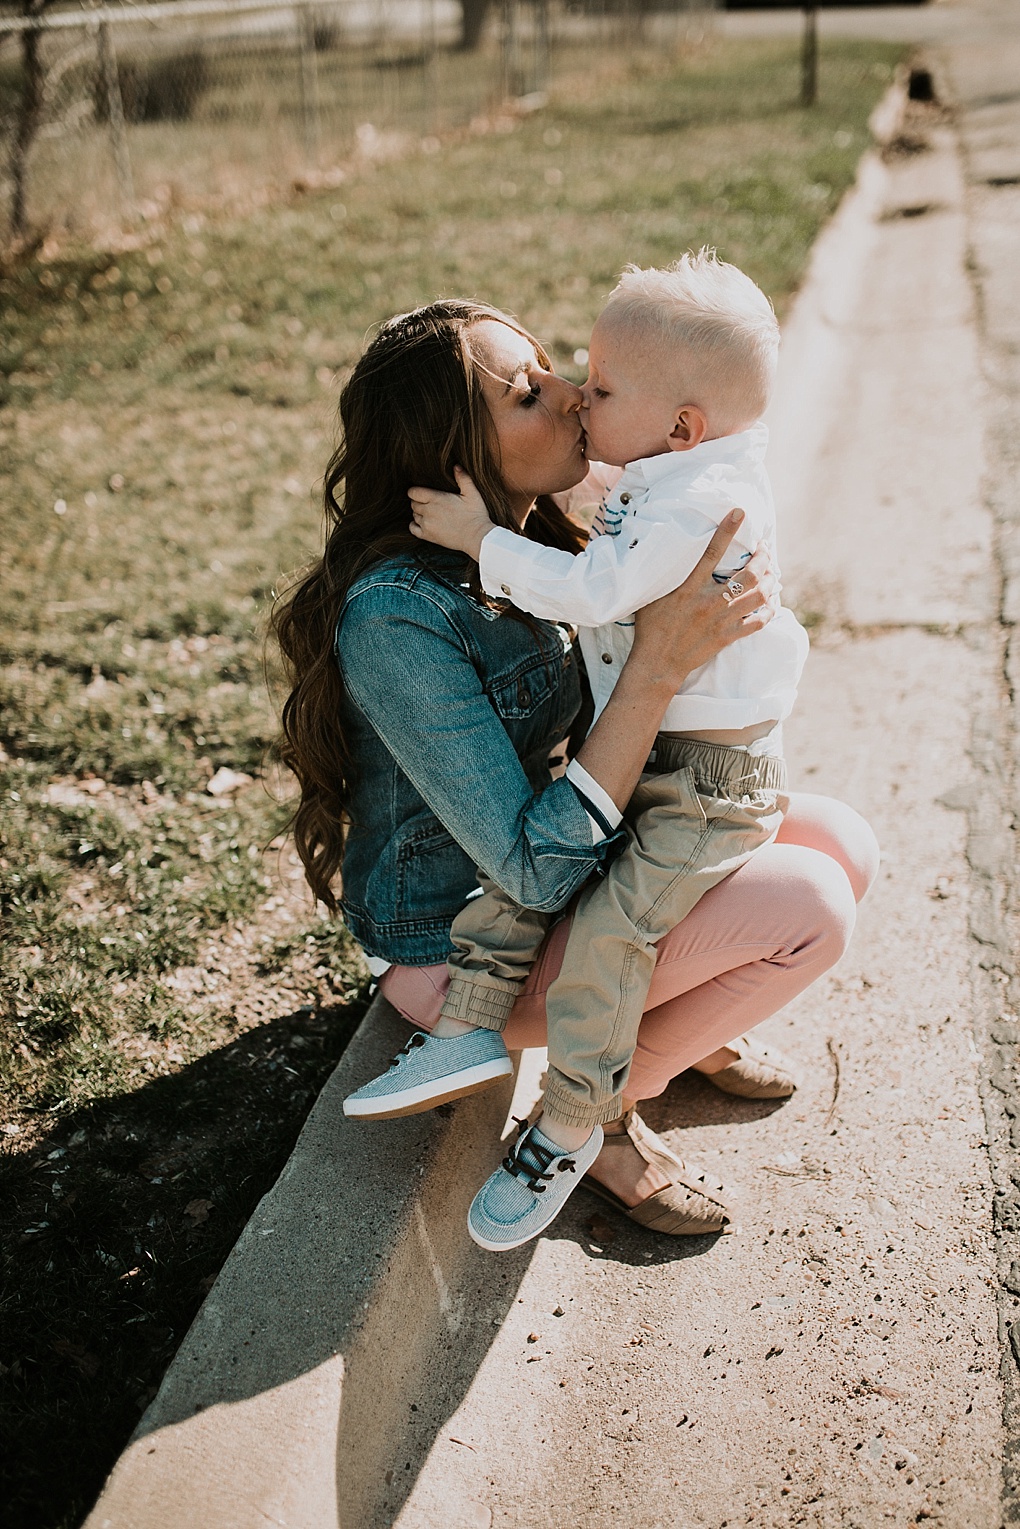 mom in blush pants with nautical stripe old navy top and jean jacket walking in the road with little boy in khaki joggers and white button up with blue stripes